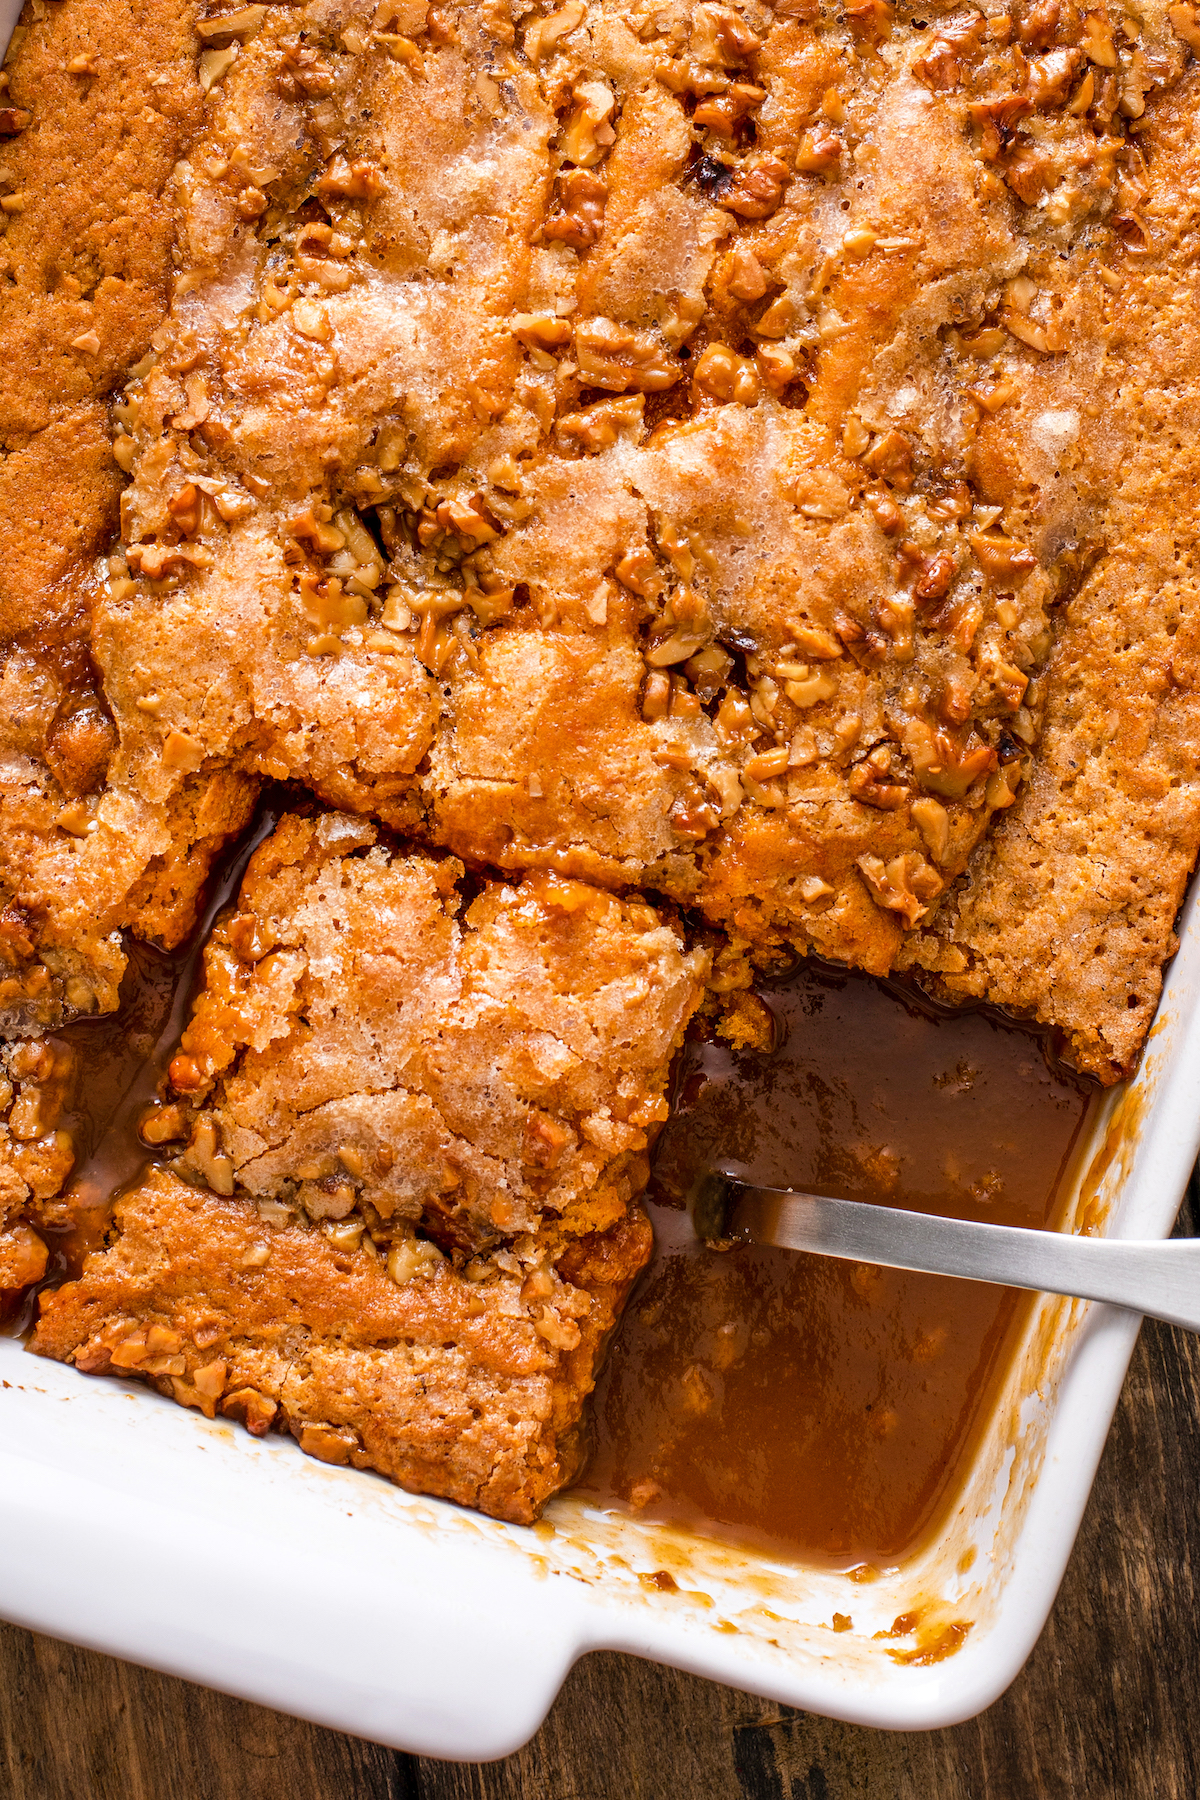 Close-up shot of caramel pumpkin cobbler, with one square removed to show the caramel sauce at the bottom of the pan.